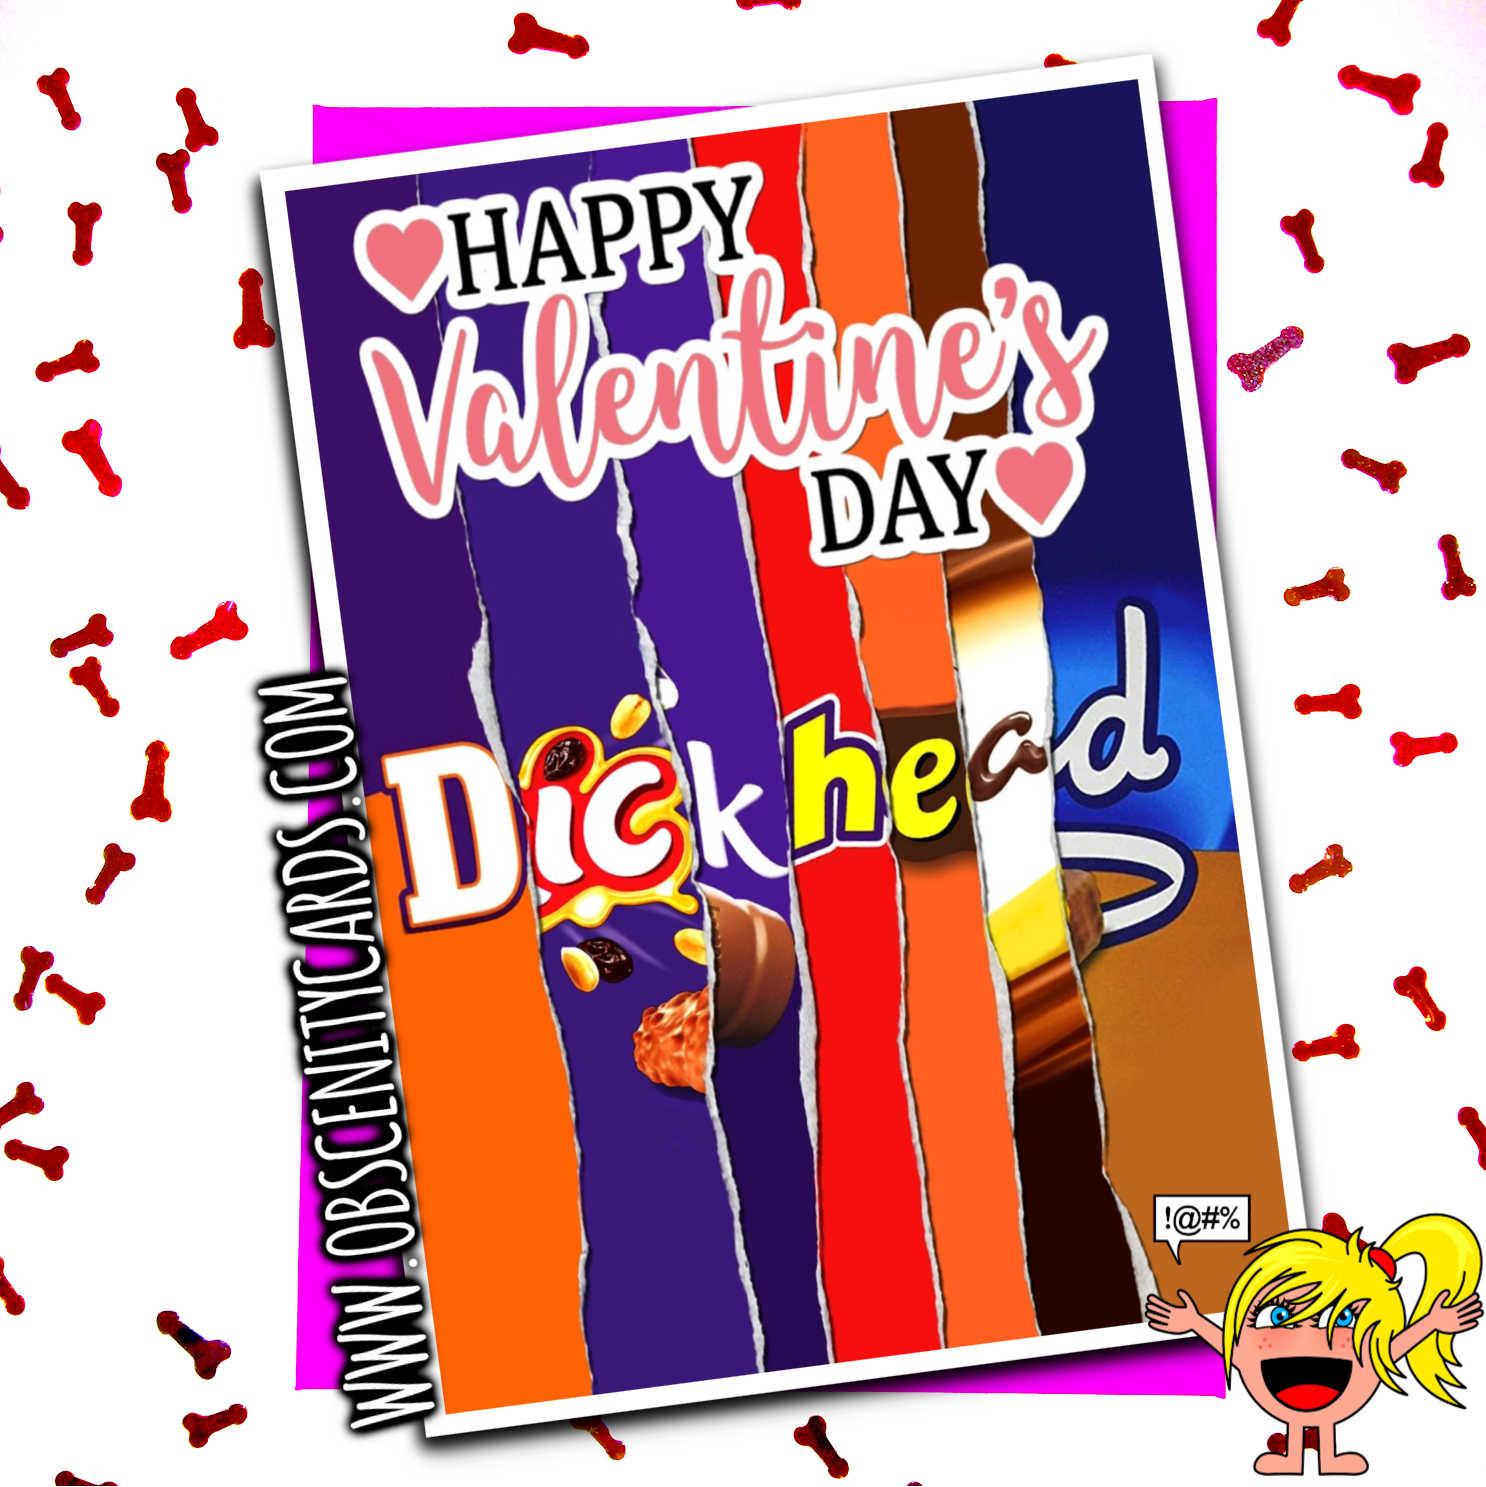 HAPPY VALENTINE'S DAY DICK HEAD CHOCOLATE WRAPPER FUNNY VALENTINES CARD